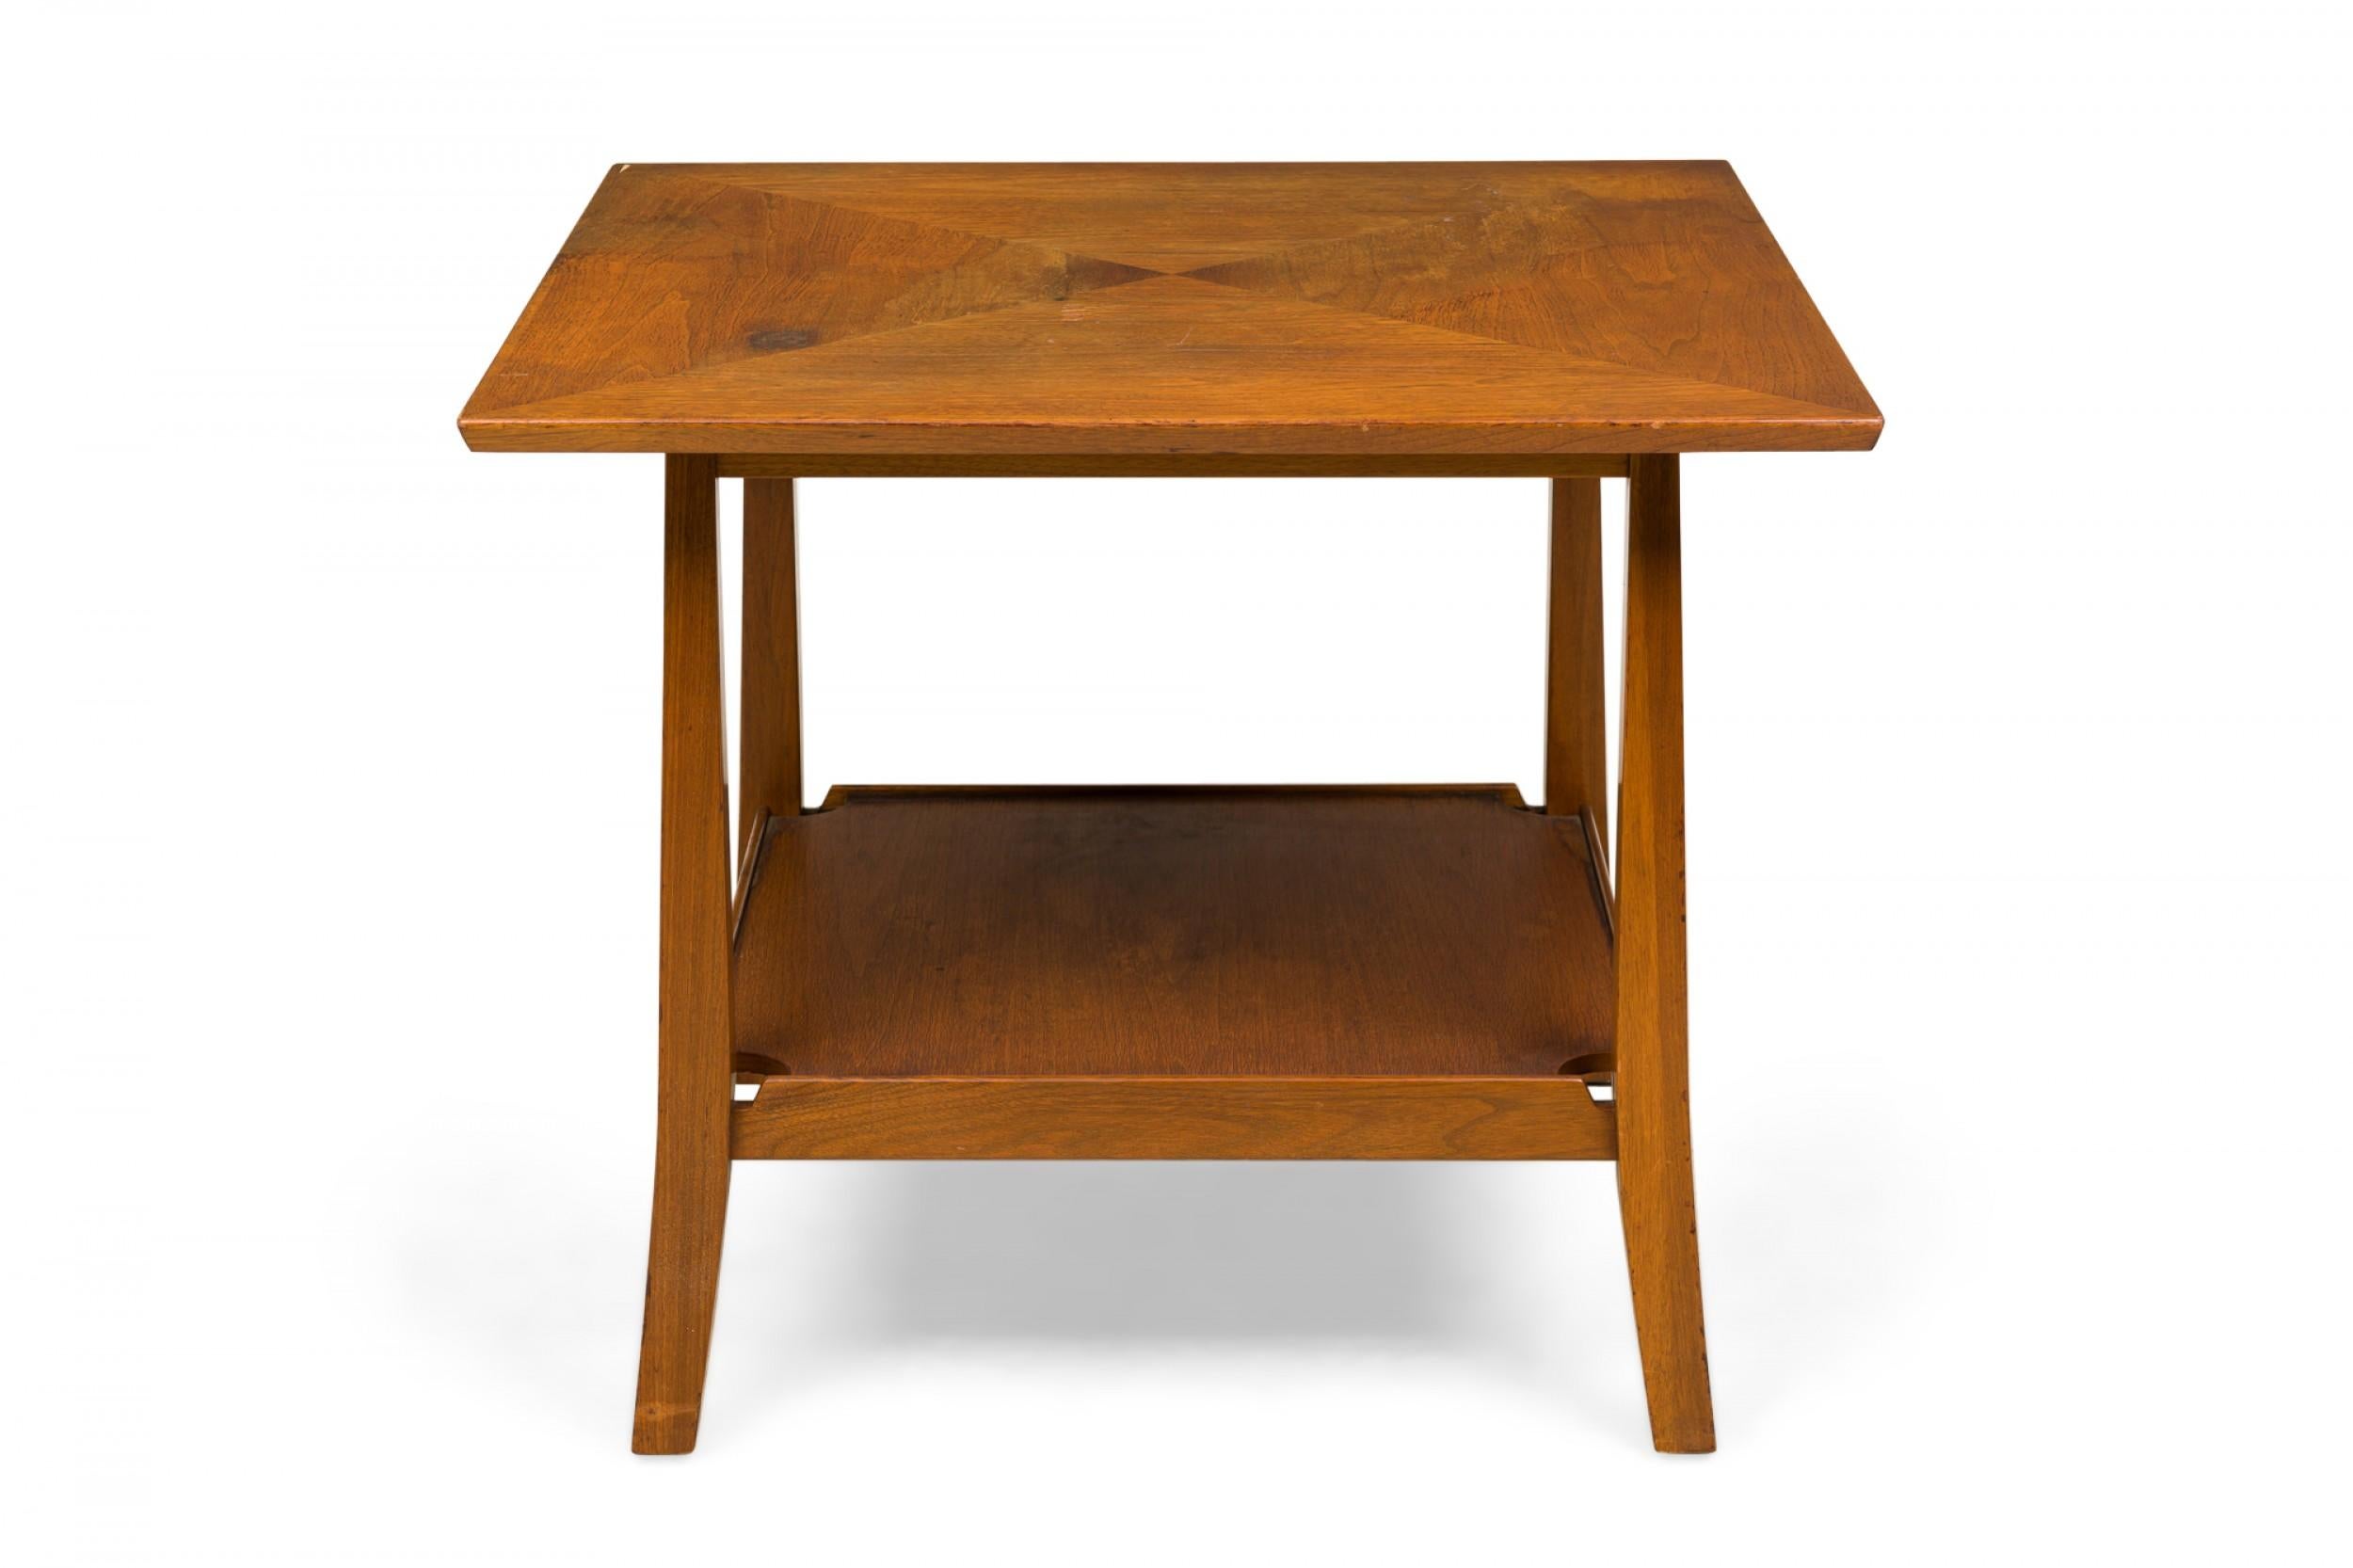 American Mid-Century wooden end / side table with a square top comprised of triangular panels that create a triangular grain pattern, resting on four square legs that curve slightly outward at the feet, connected by a square stretcher shelf. (EDWARD